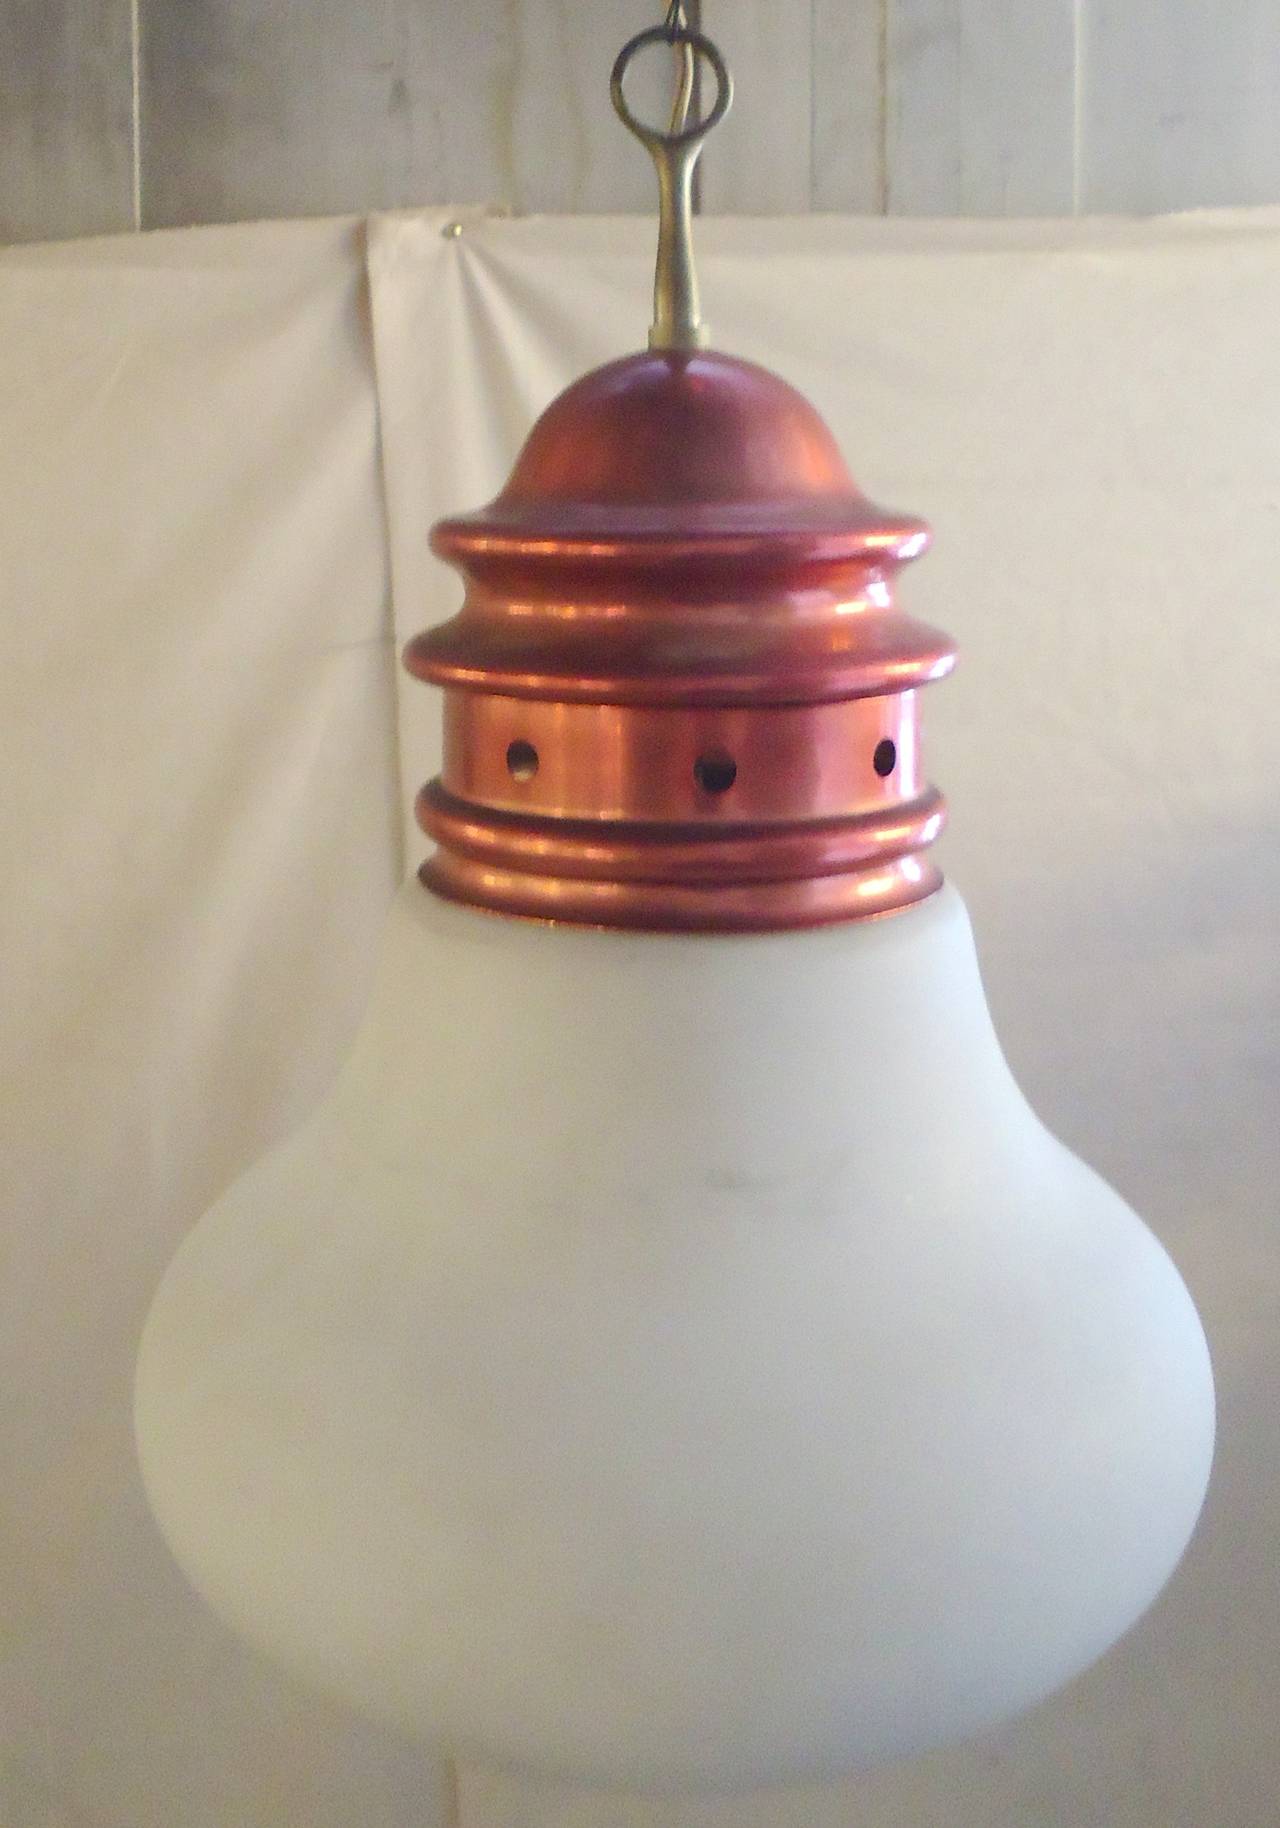 Hanging pendant with frosted white globe and red metal trim.

(Please confirm item location - NY or NJ - with dealer)